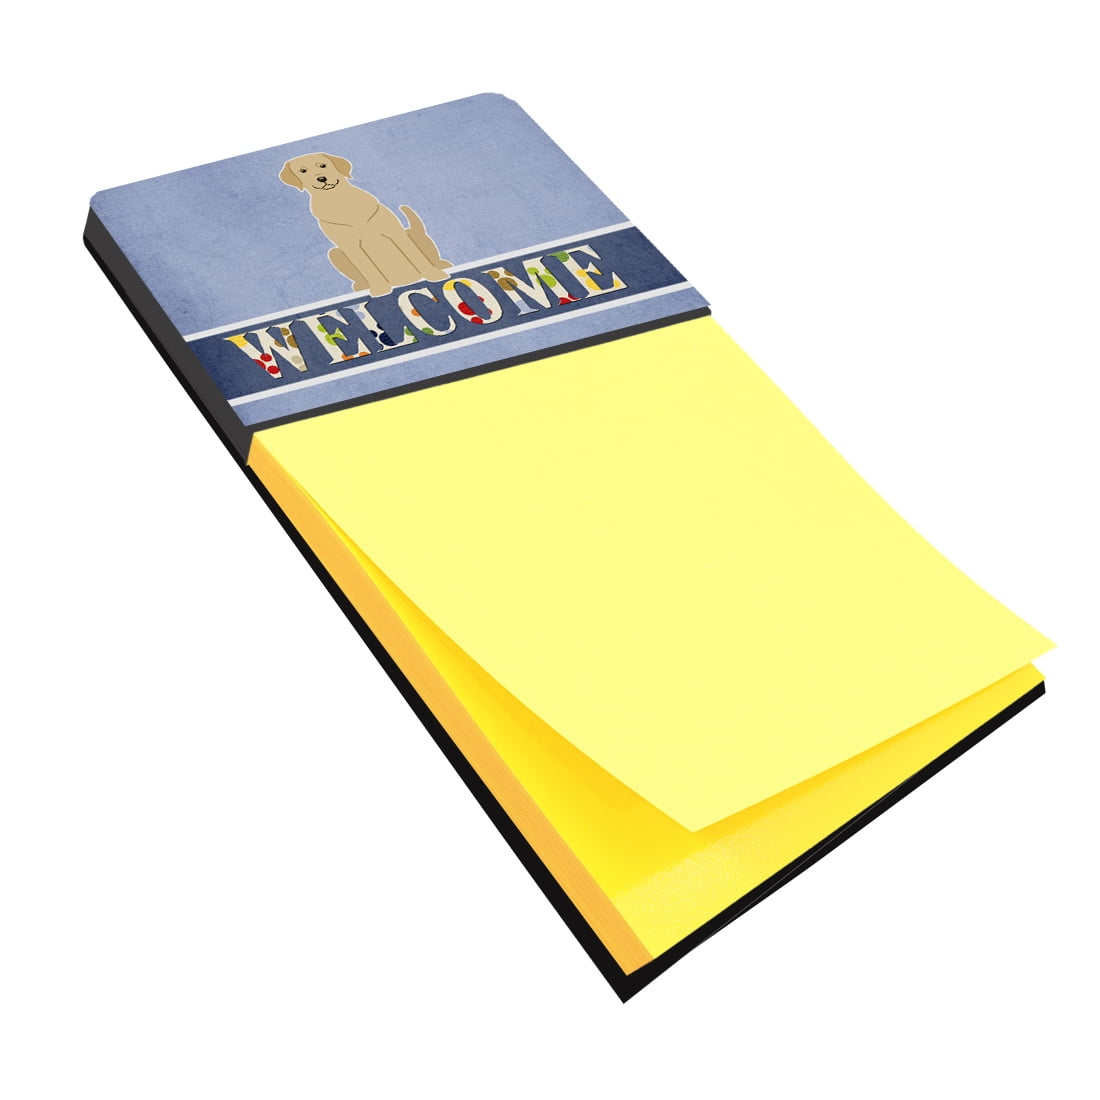 Bb5636sn Yellow Labrador Welcome Sticky Note Holder